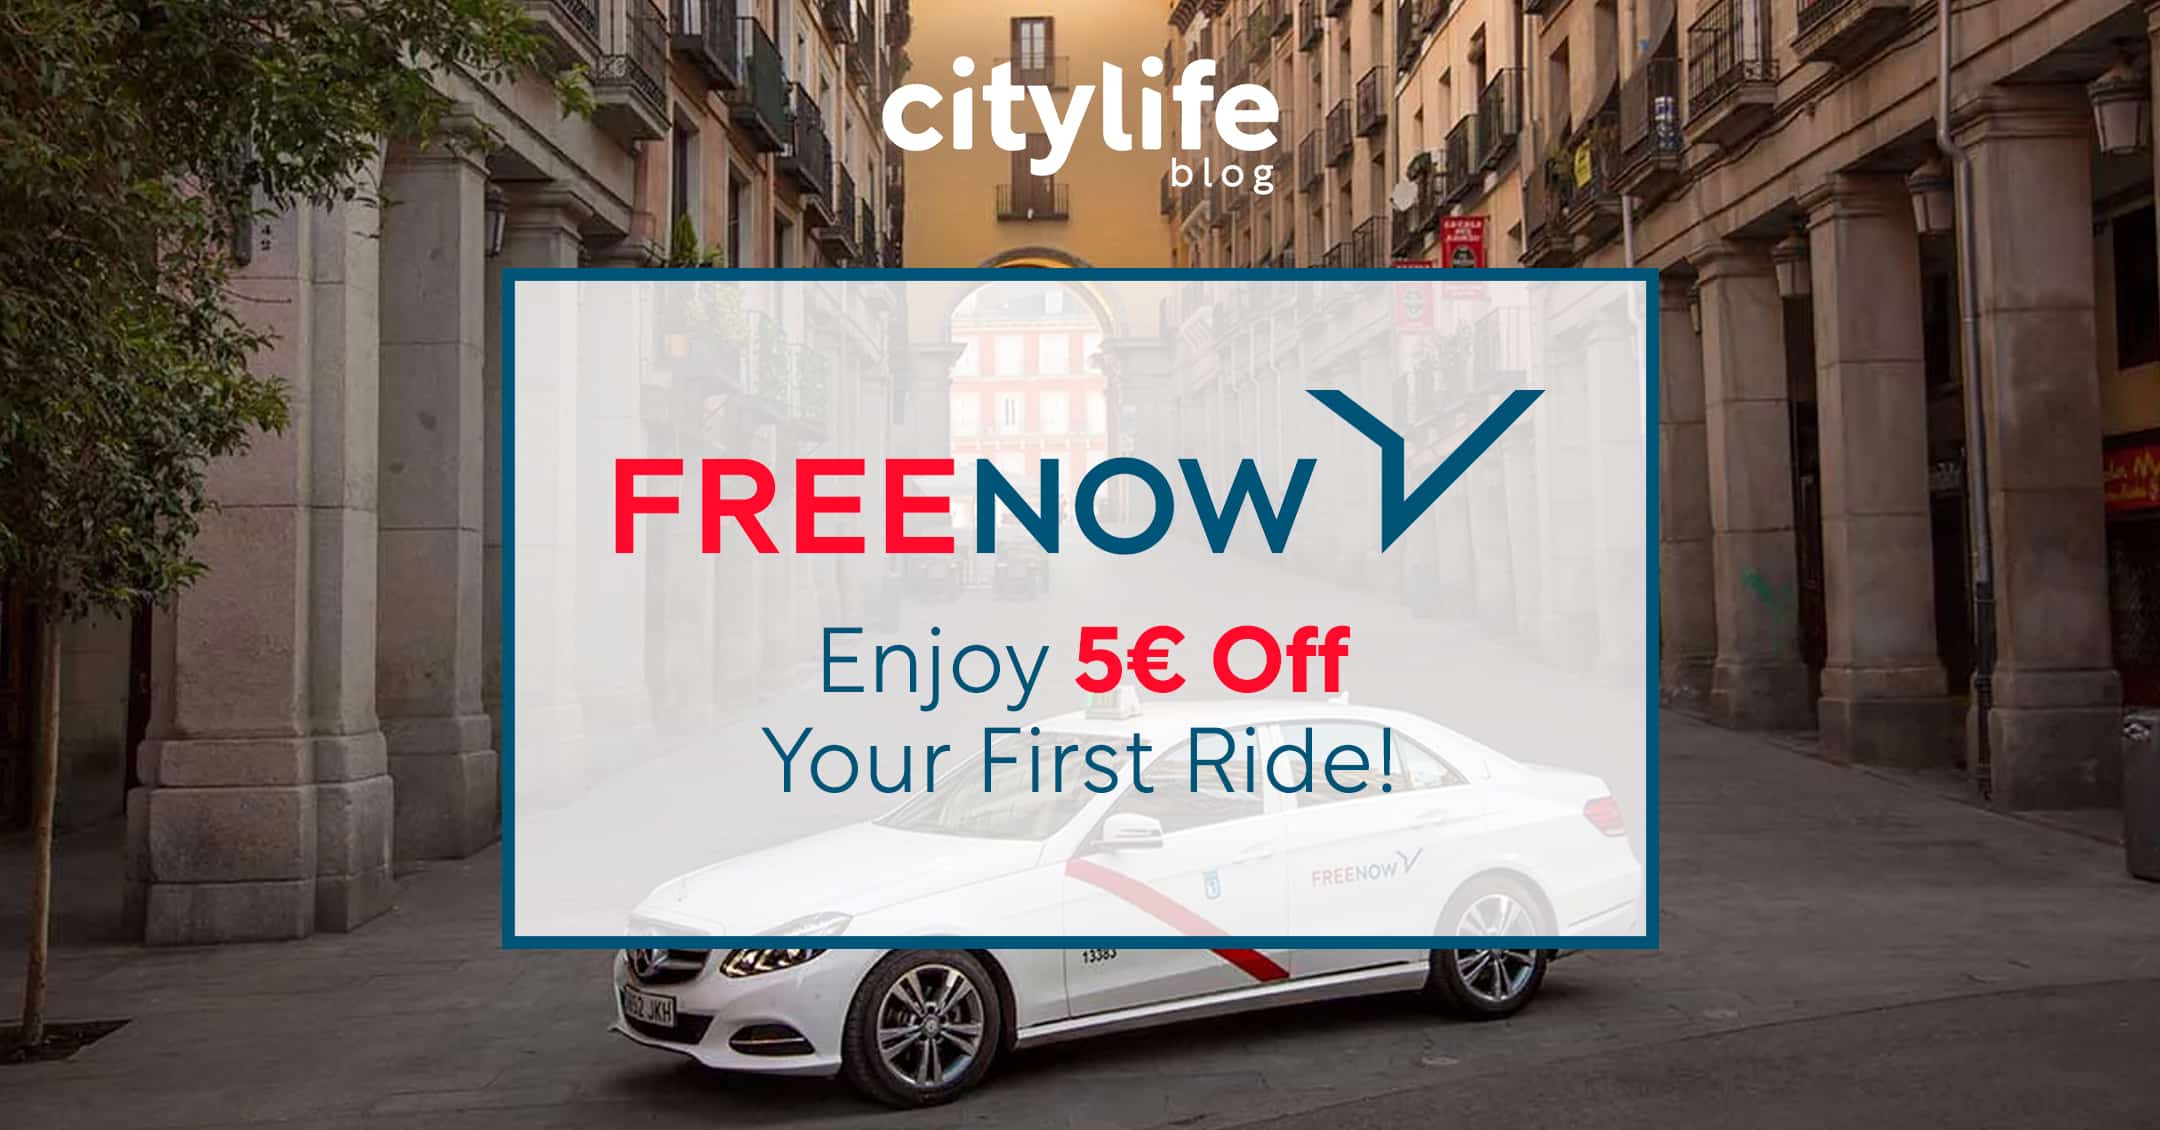 featured-image-freenow-free-now-taxi-ride-citylife-madrid